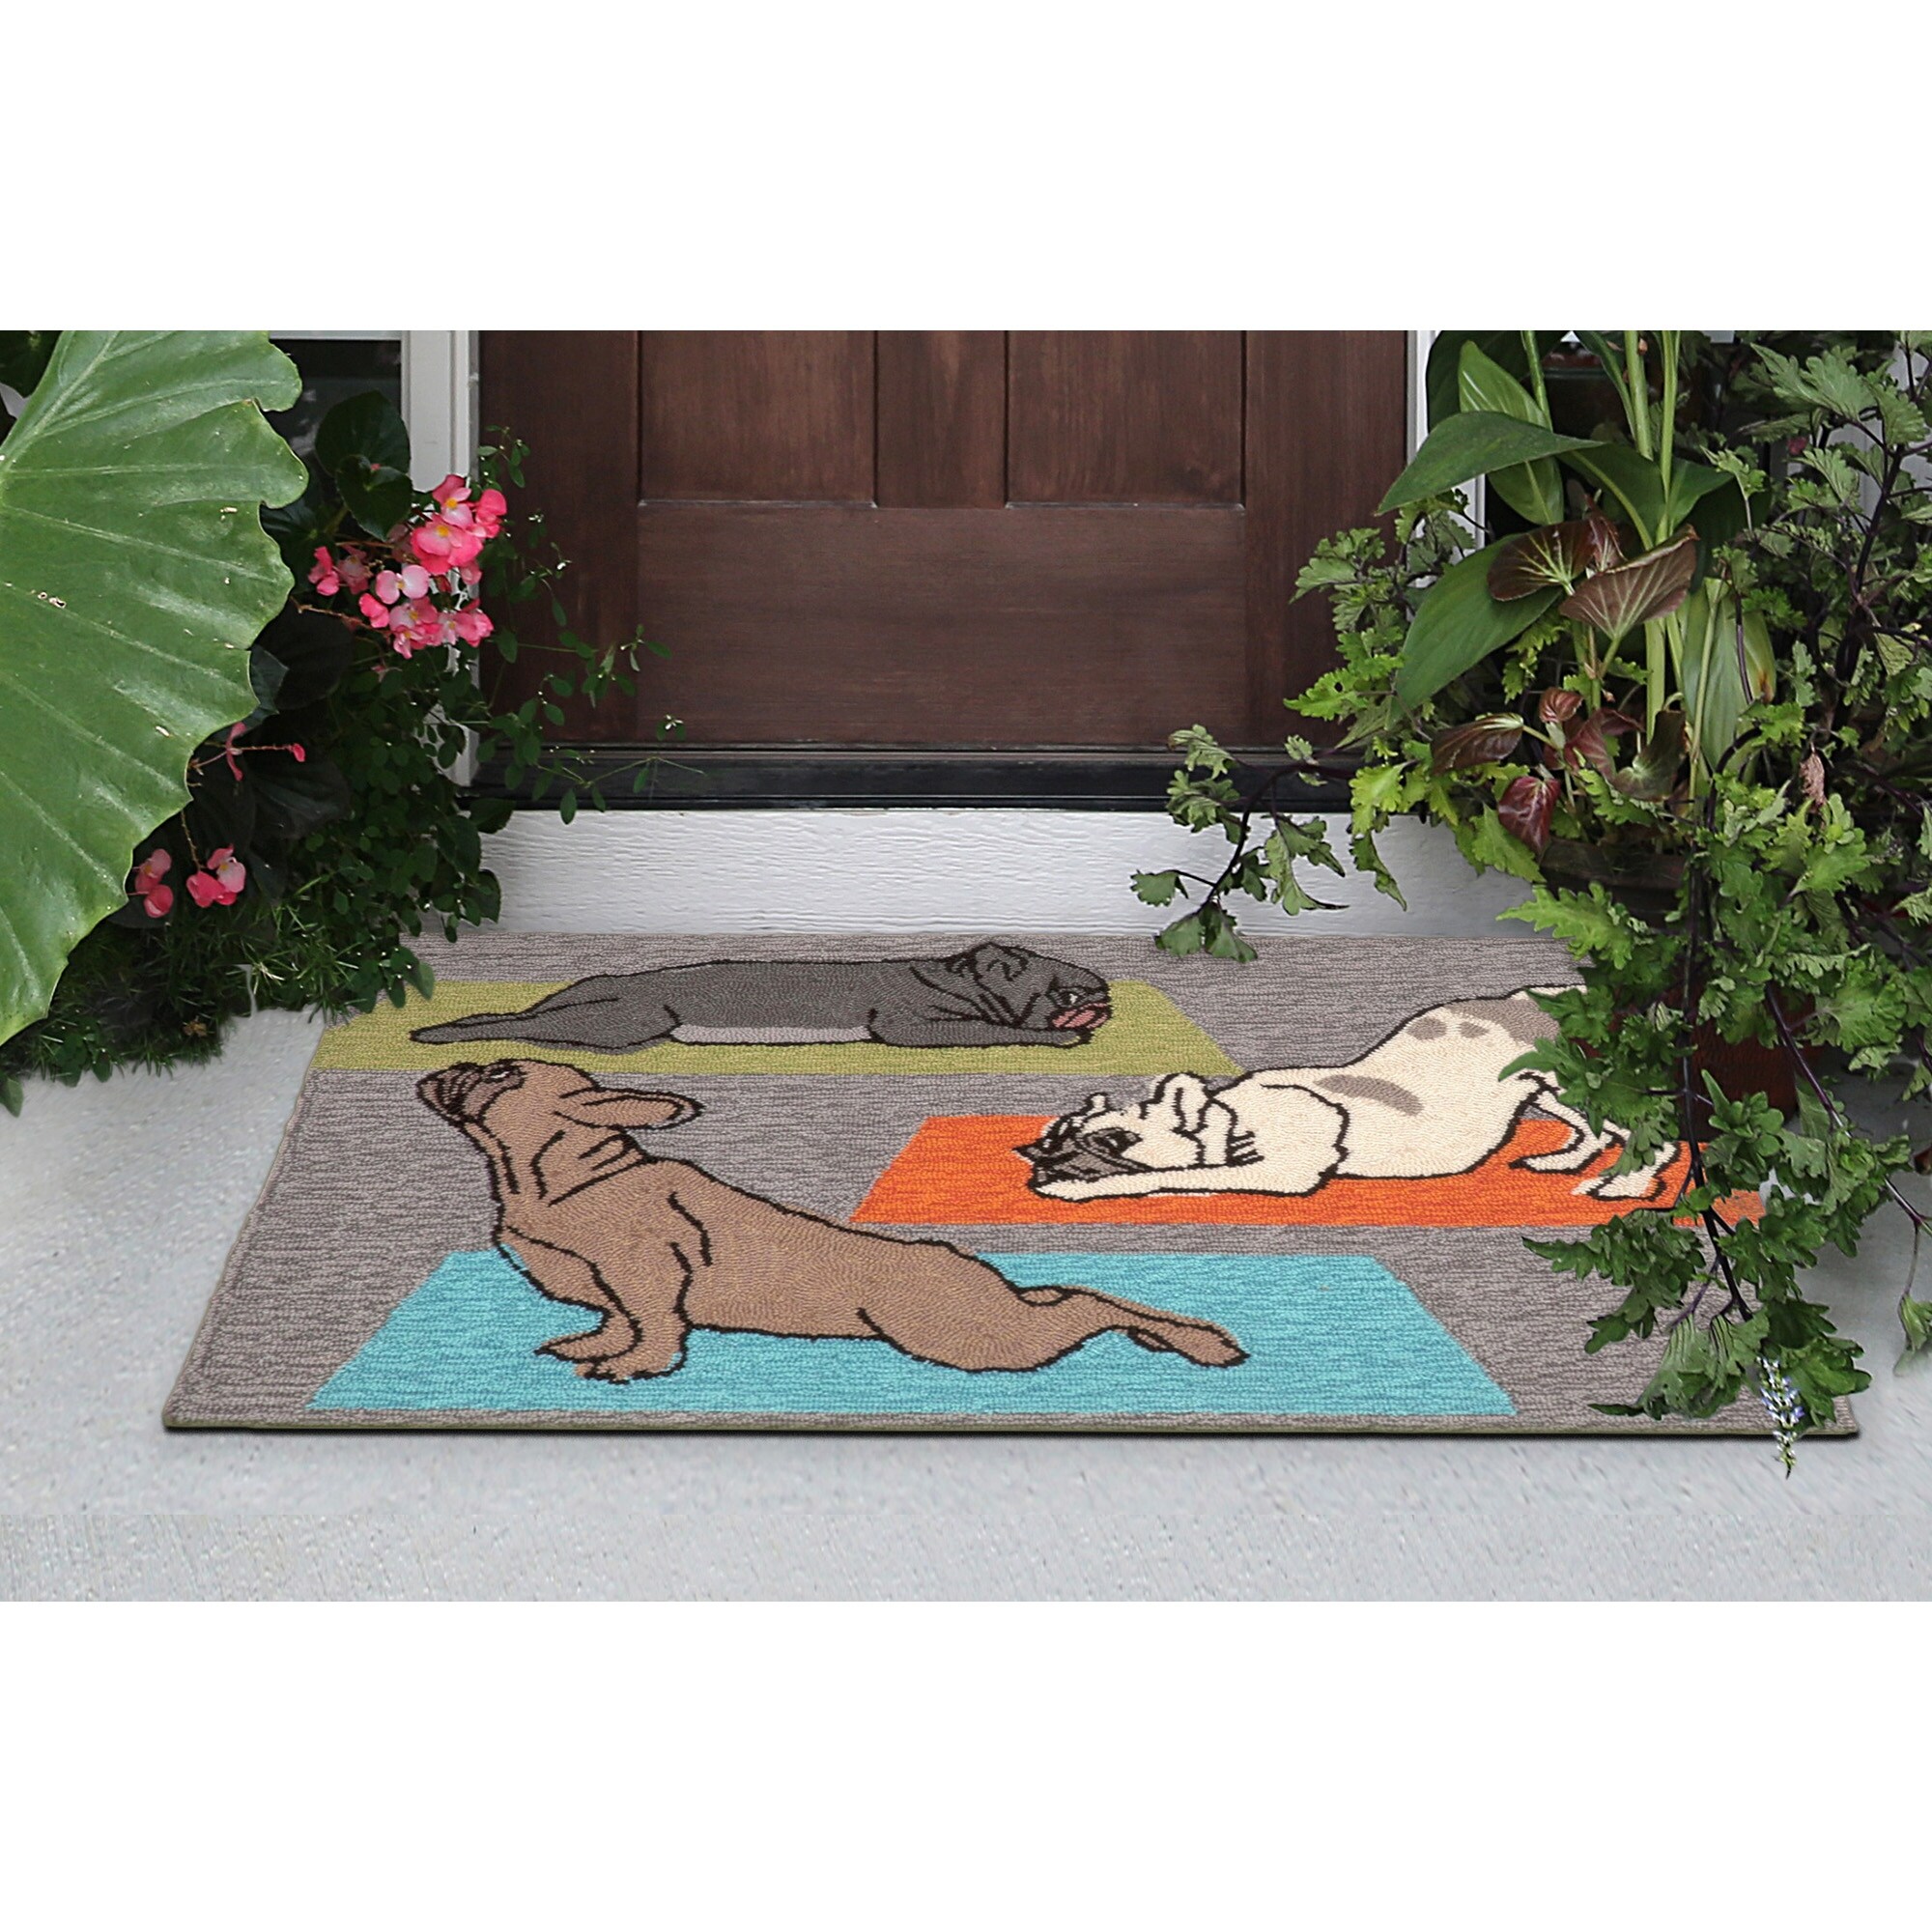 https://ak1.ostkcdn.com/images/products/is/images/direct/95580eba9141273a52ab8e15f3a786691a6f9d33/Liora-Manne-Frontporch-Yoga-Dogs-Indoor-Outdoor-Rug.jpg